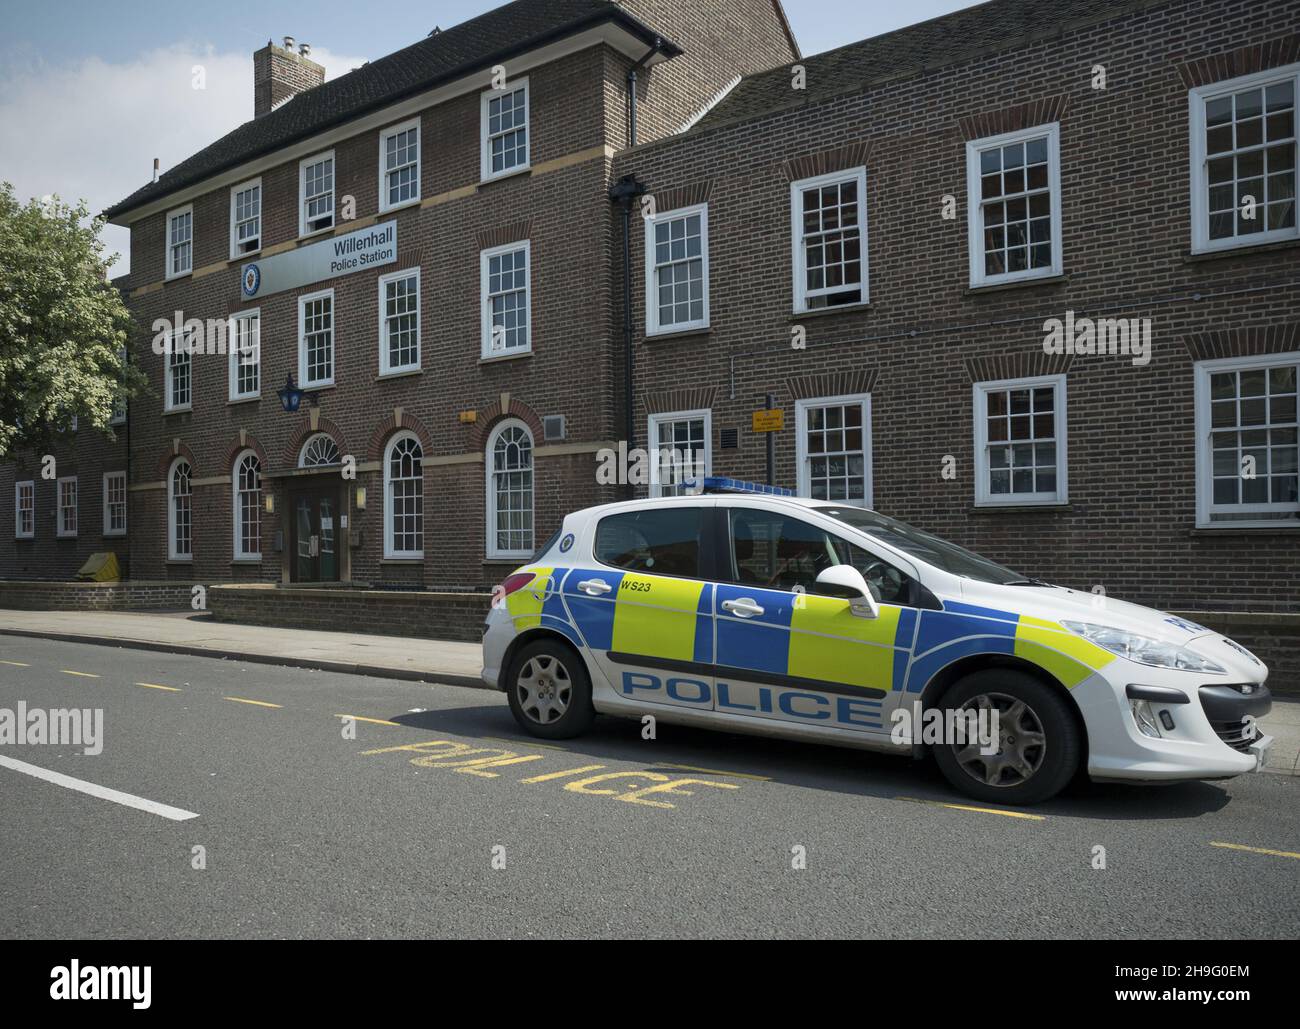 BIRMINGHAM, UNITED KINGDOM - Jul 30, 2014: A view of a police car parked near Willenhall police station in Birmingham, United Kingdom Stock Photo